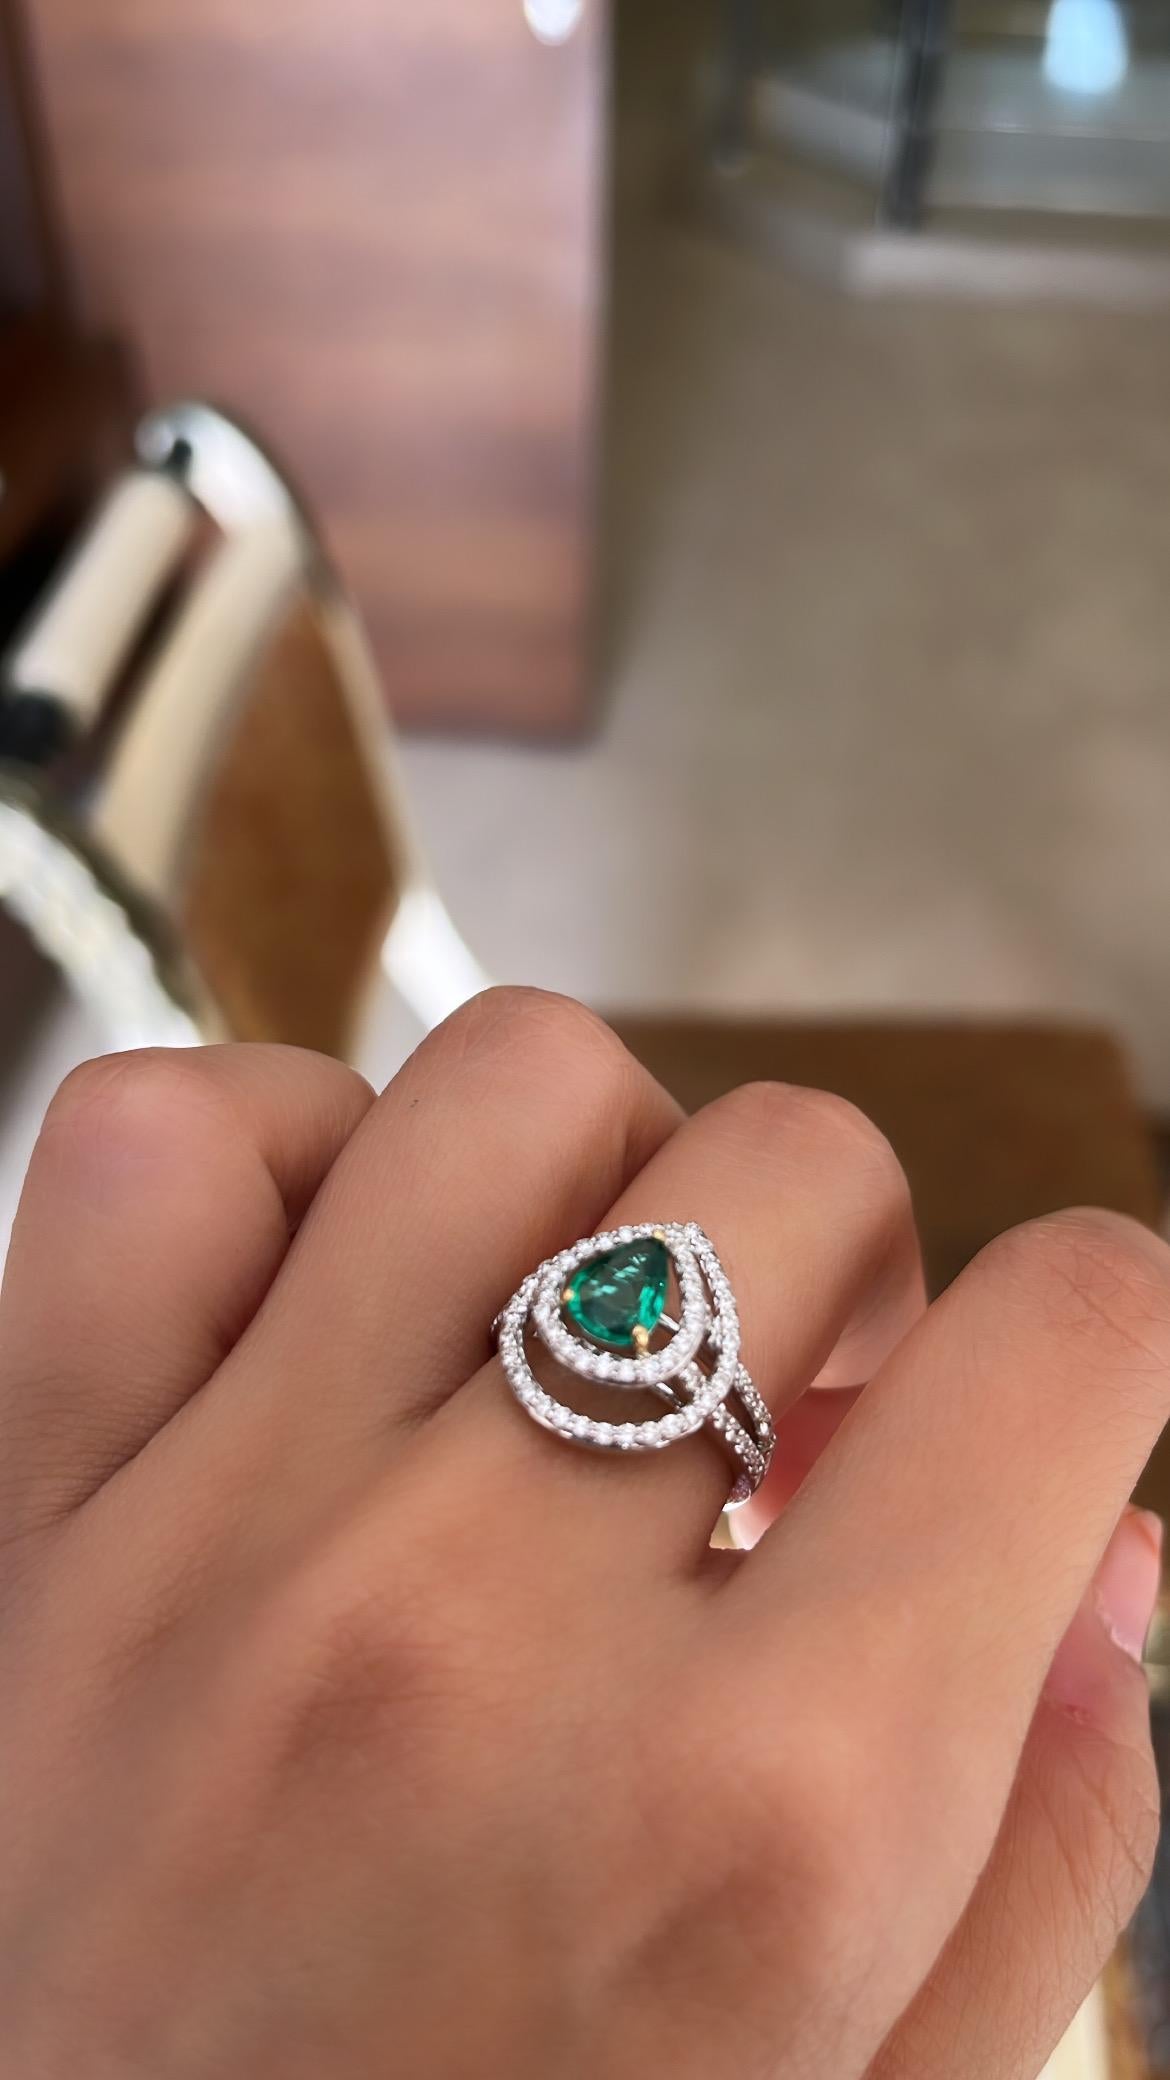 A very beautiful and wearable Emerald Cocktail/ Engagement Ring set in 18K Gold & Diamonds. The weight of the Emerald pear is 0.69 carats. The Emerald is of Zambian origin and is completely natural without any treatment. The weight of the Diamonds